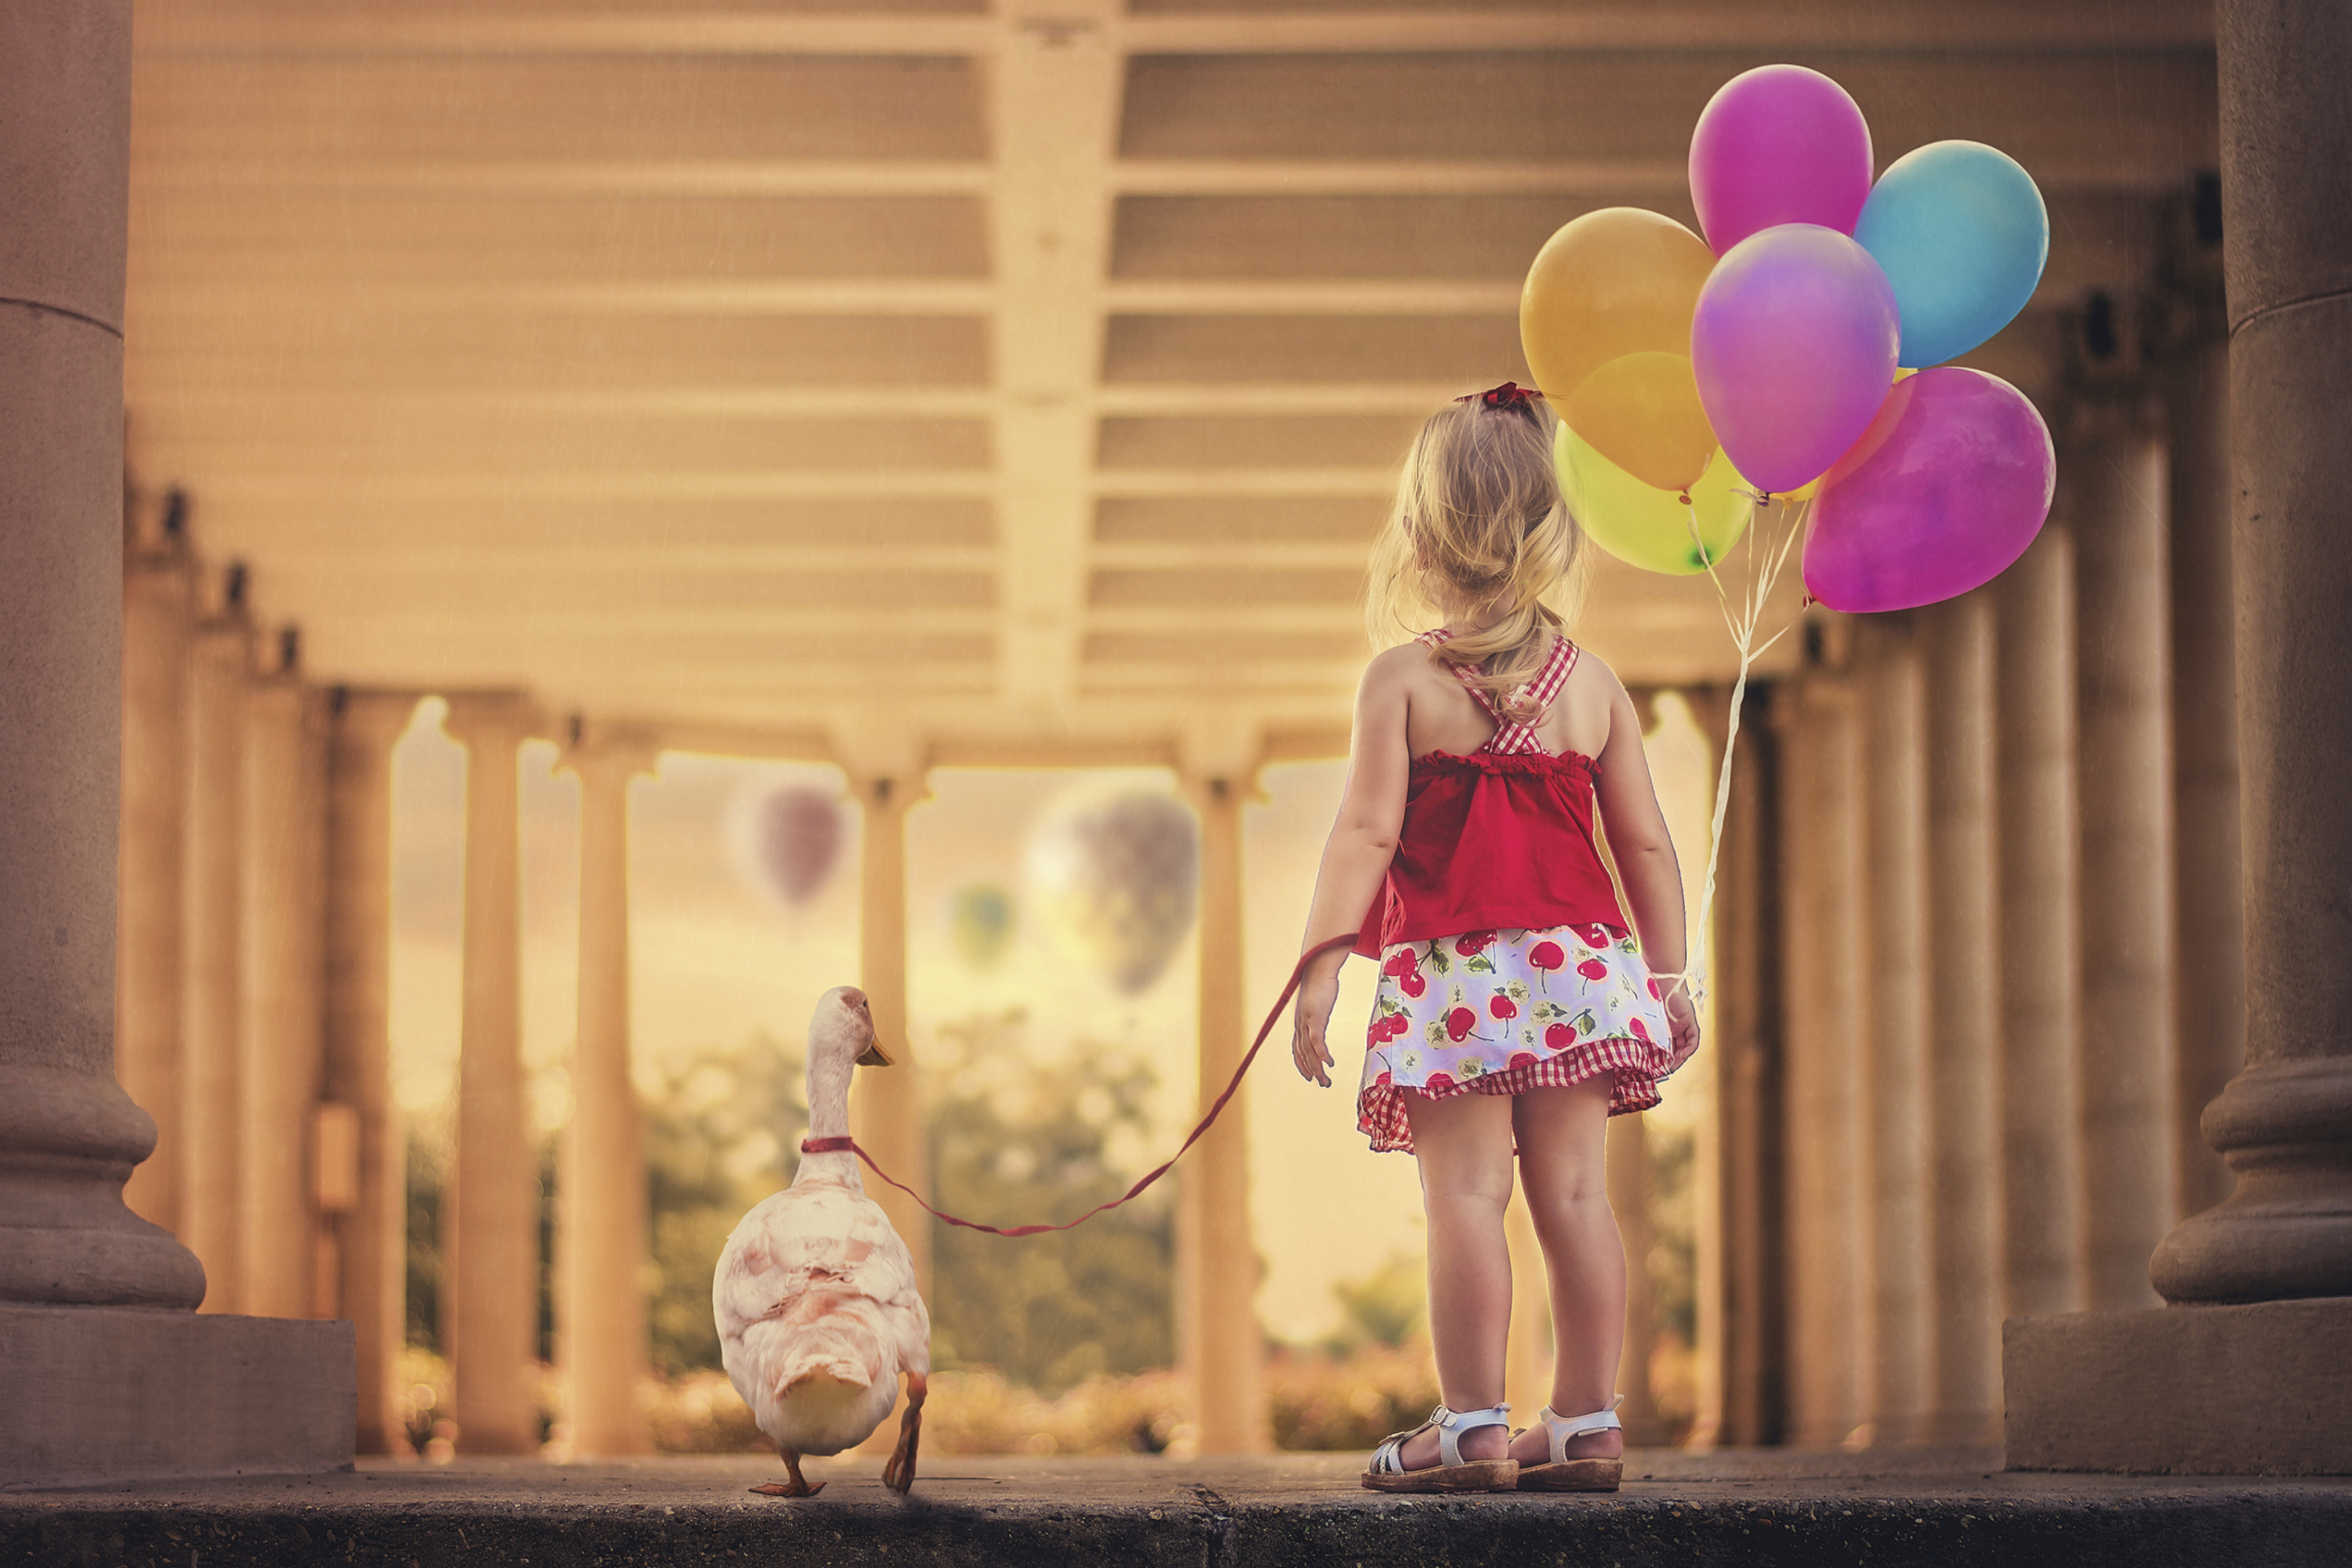 Little Girl With Colorful Balloons wallpaper 2880x1920